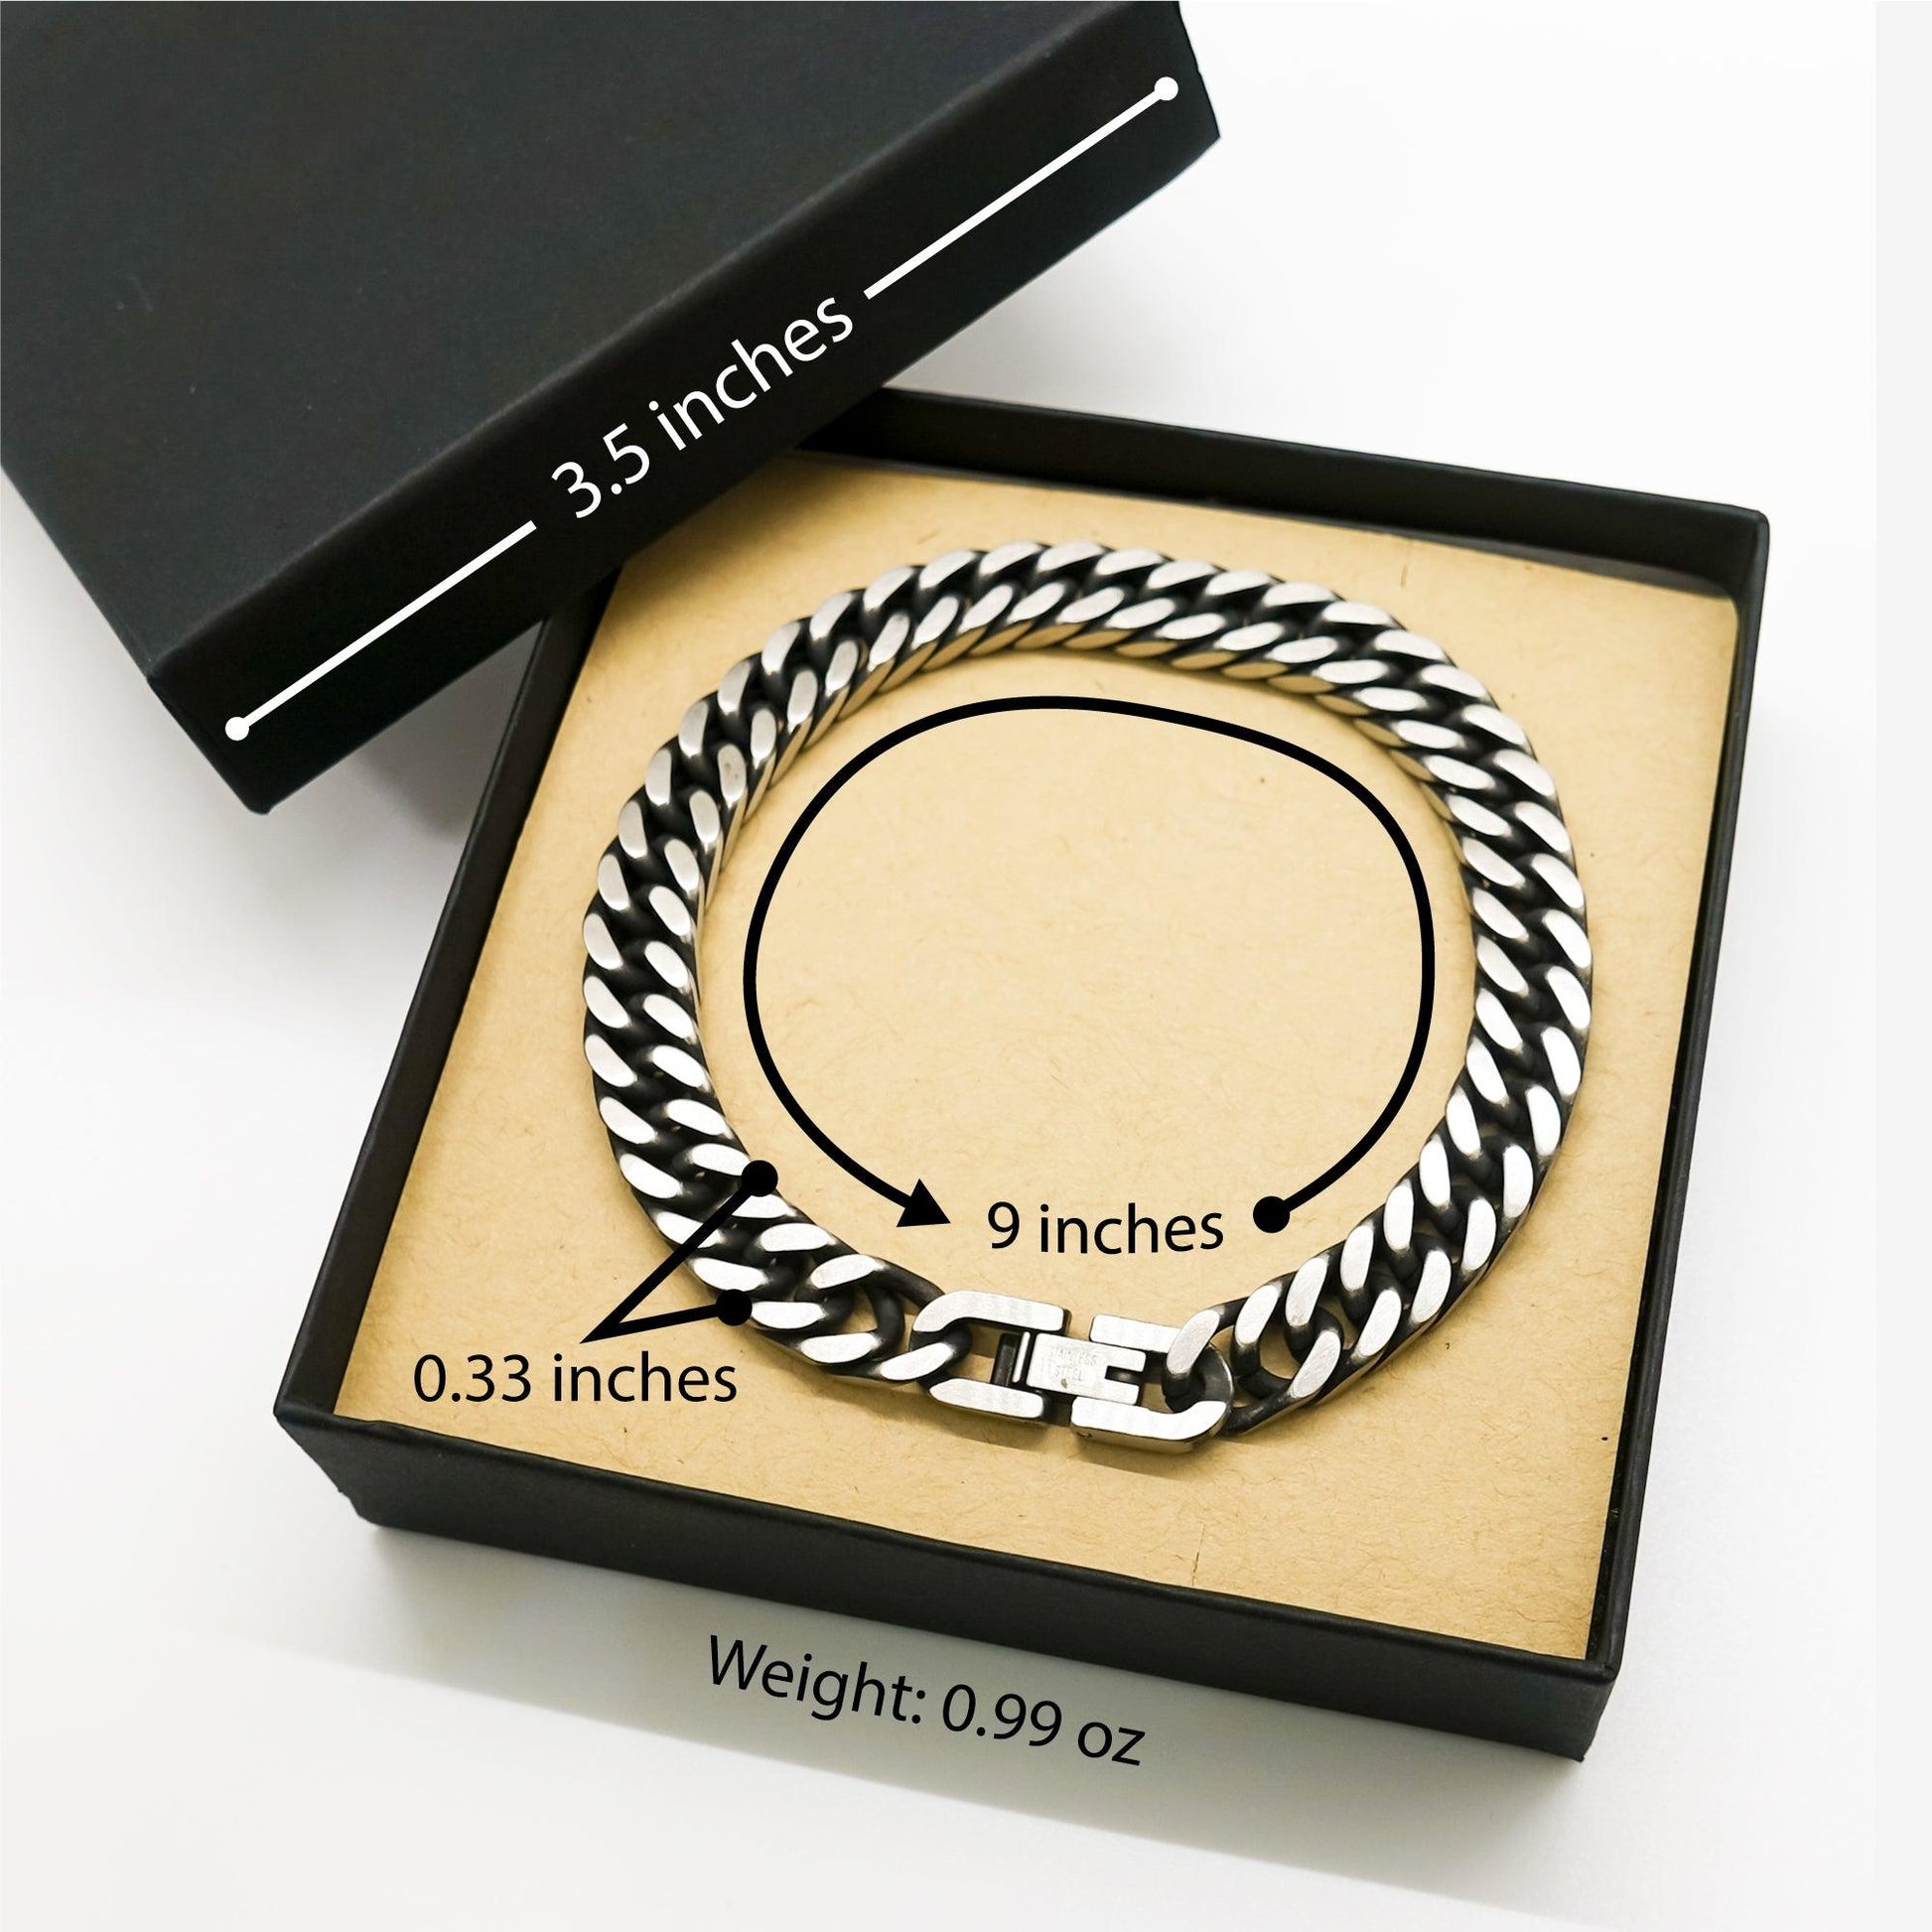 Remarkable Marketing Manager Gifts, Your dedication and hard work, Inspirational Birthday Christmas Unique Cuban Link Chain Bracelet For Marketing Manager, Coworkers, Men, Women, Friends - Mallard Moon Gift Shop